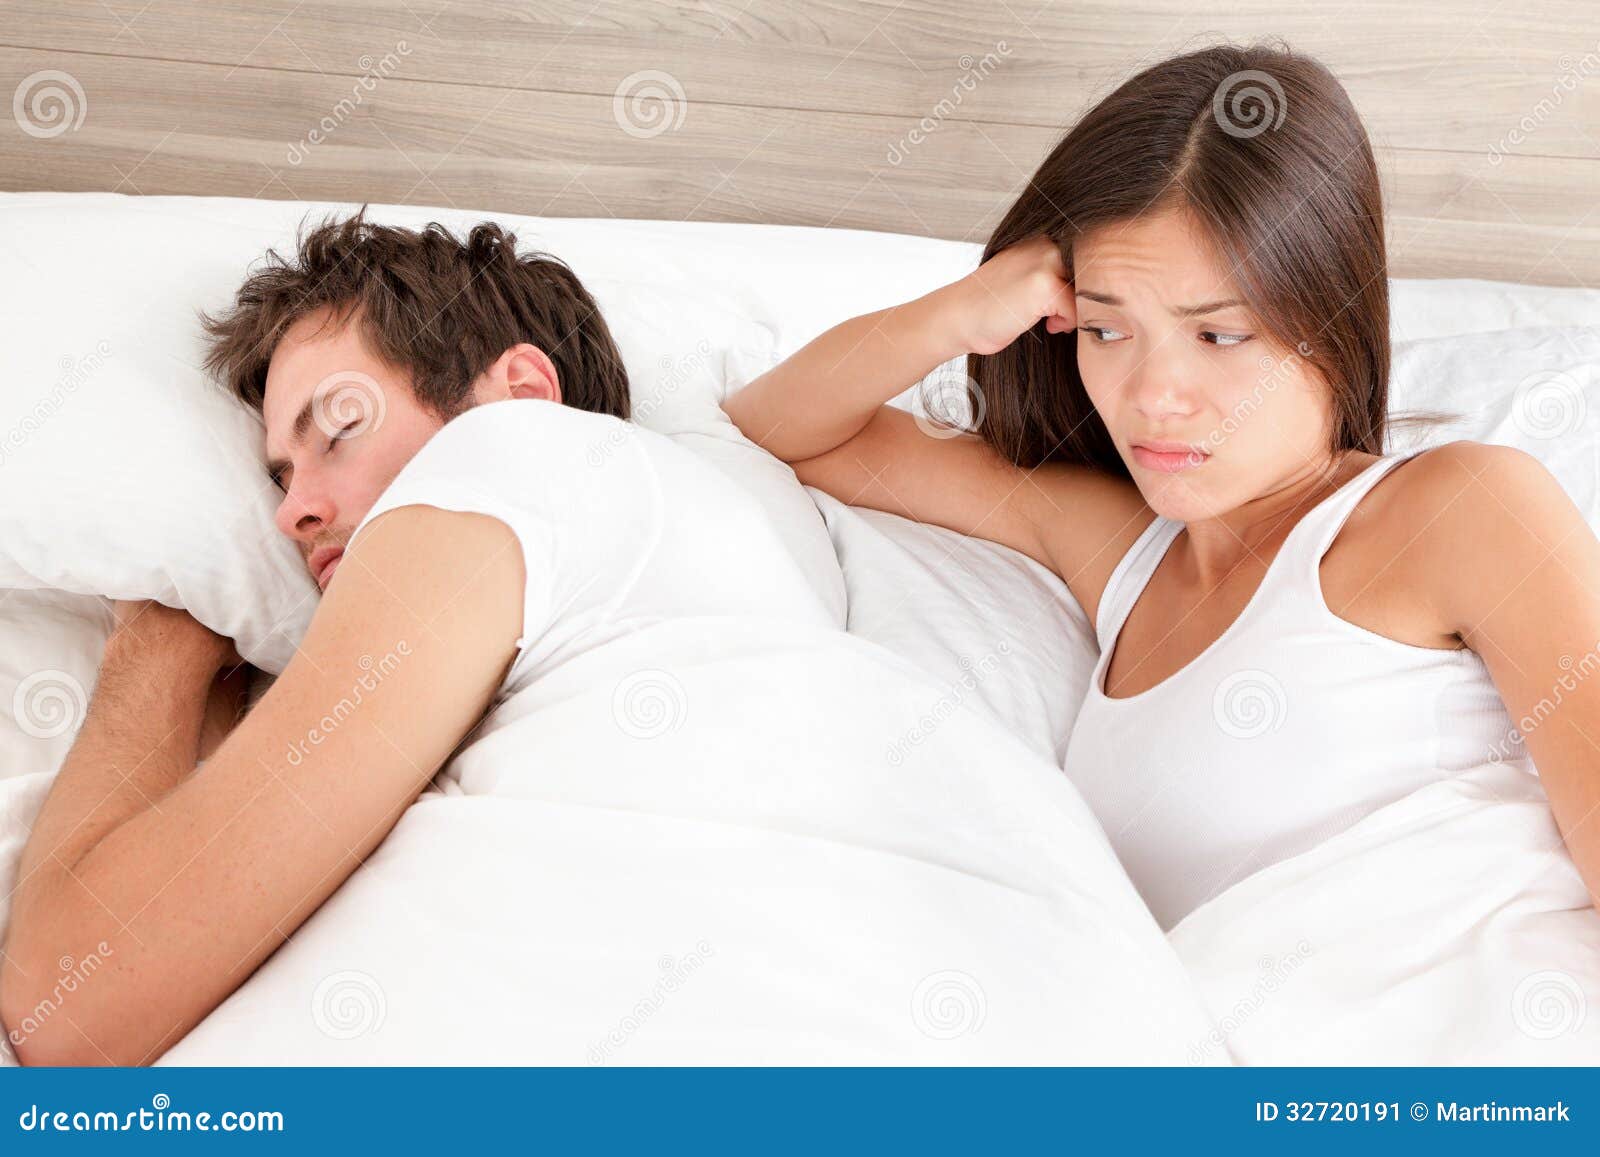 Marriage Couple Marital Problems in Bed Stock Image picture image